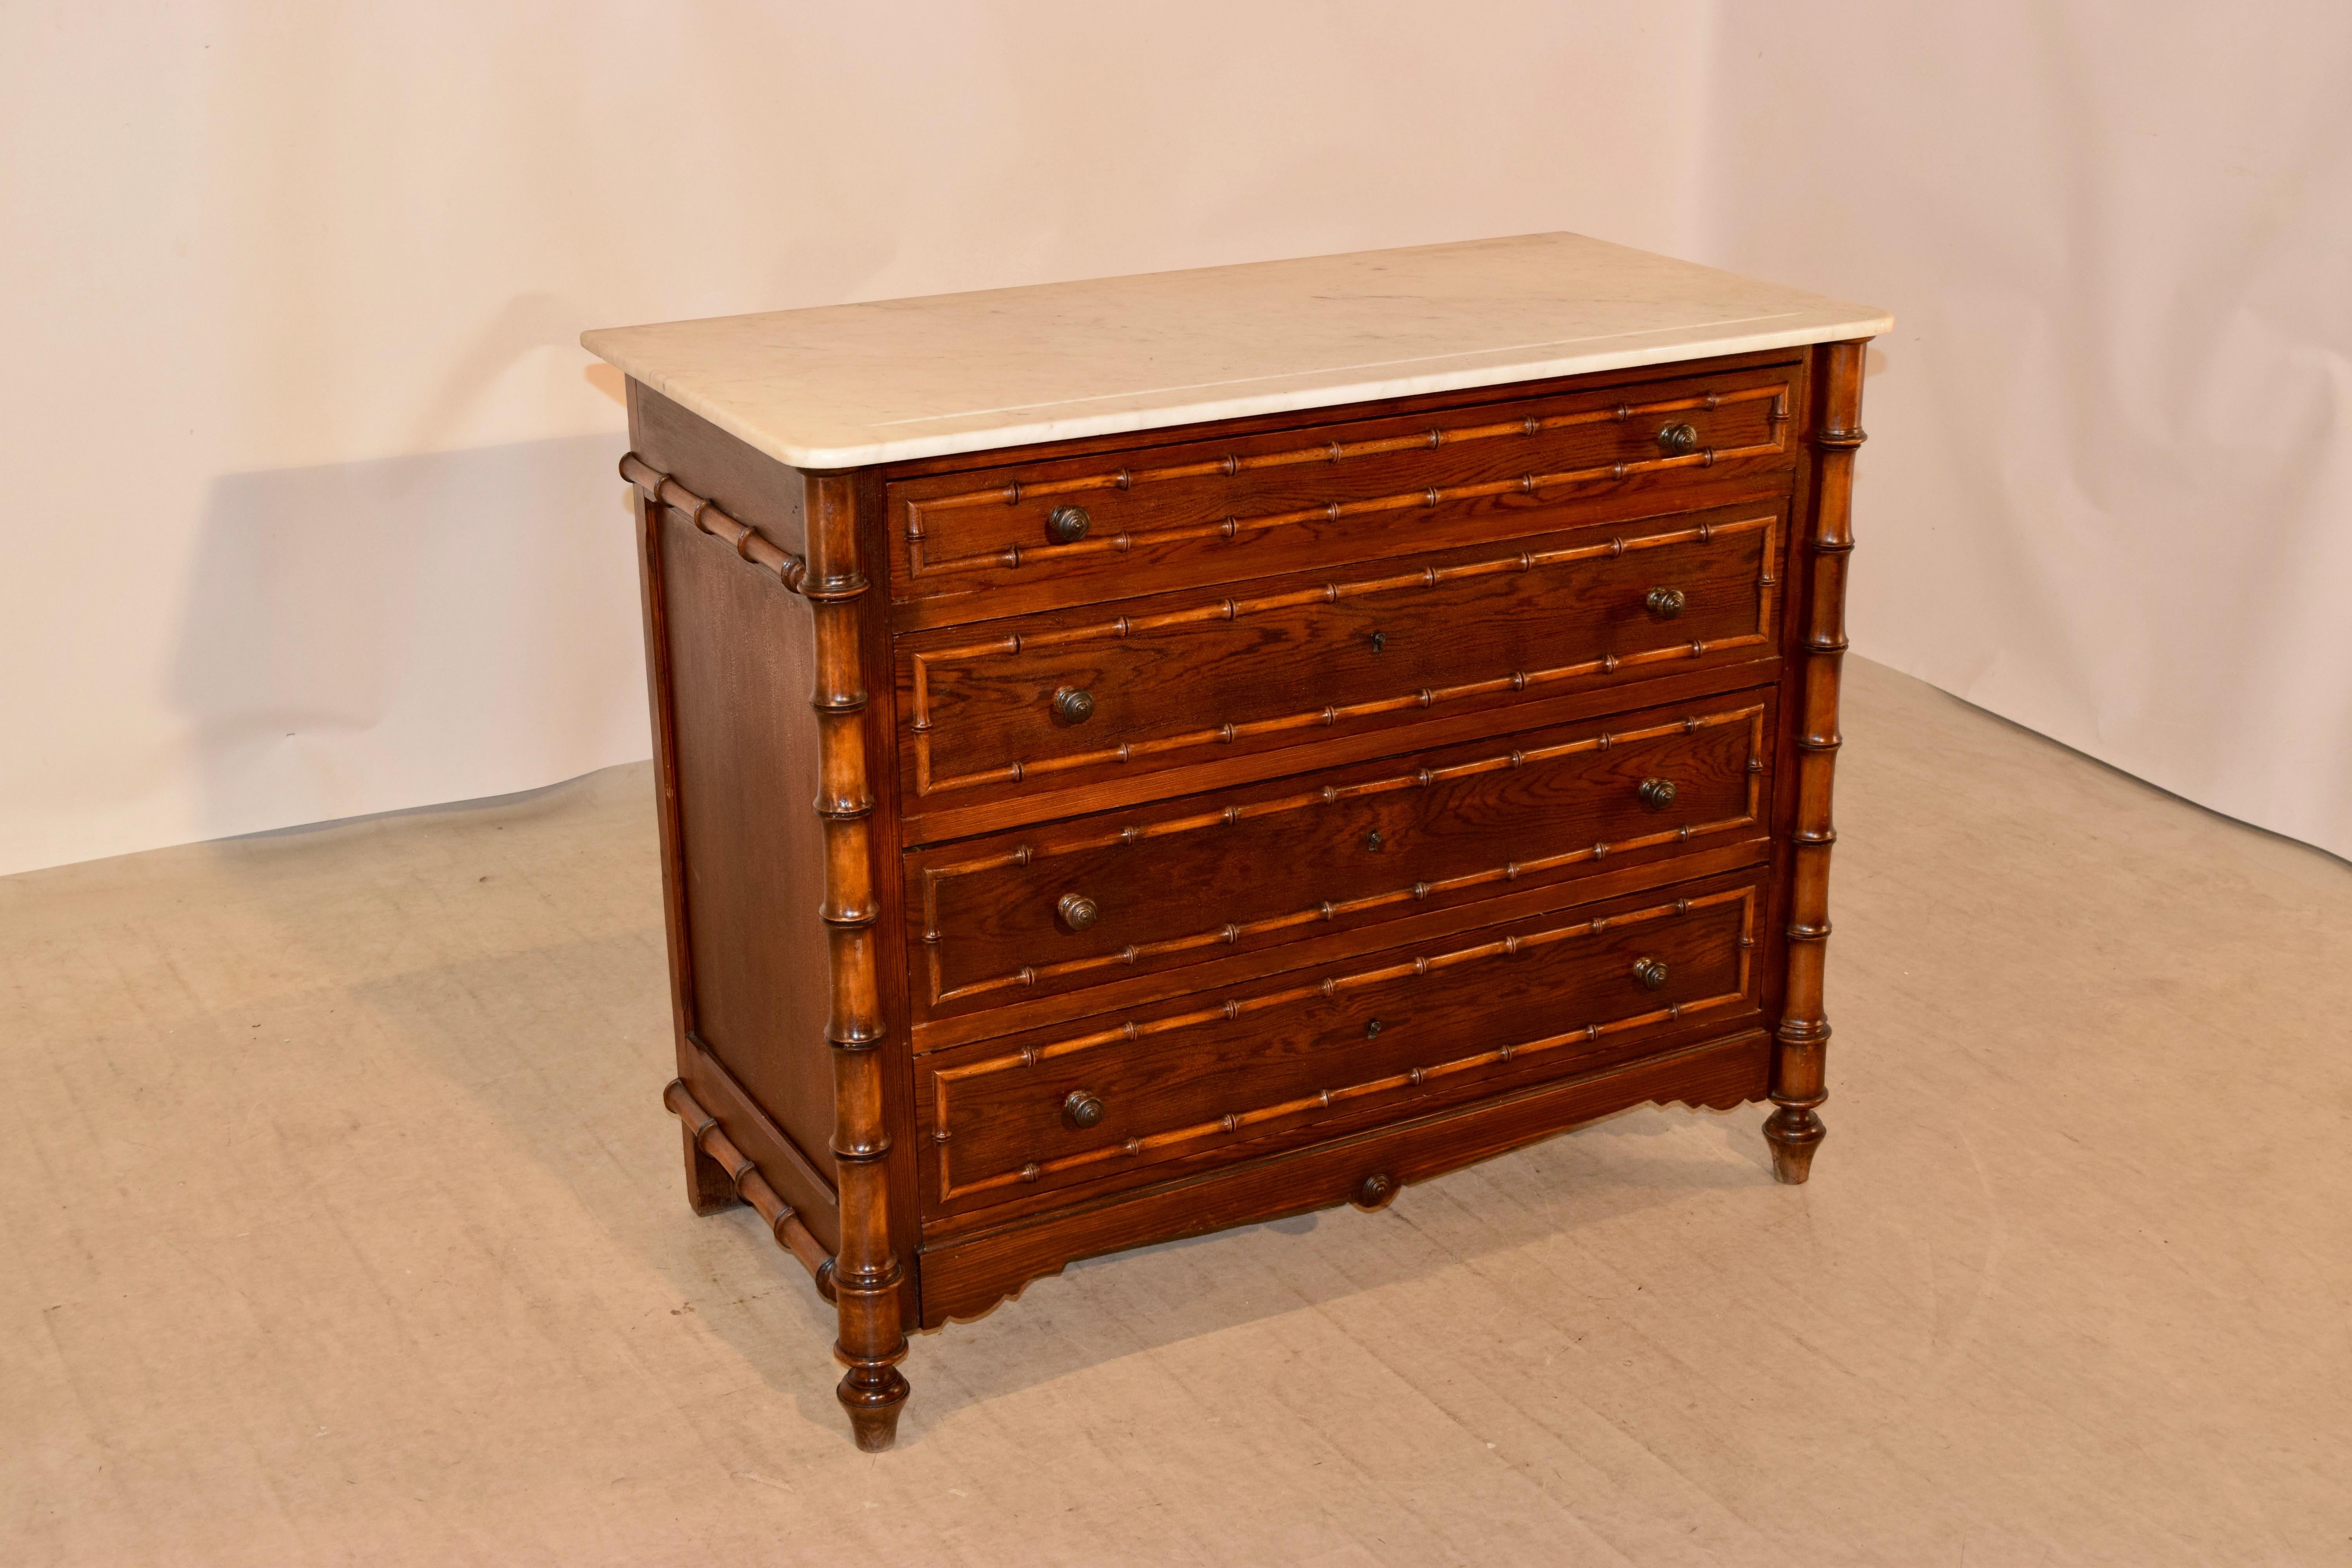 19th century faux bamboo chest of drawers from France with a white marble top resting atop a pine and cherry case with simple paneled sides with hand-turned molding in the form of bamboo. The front of the case has four drawers, also with applied